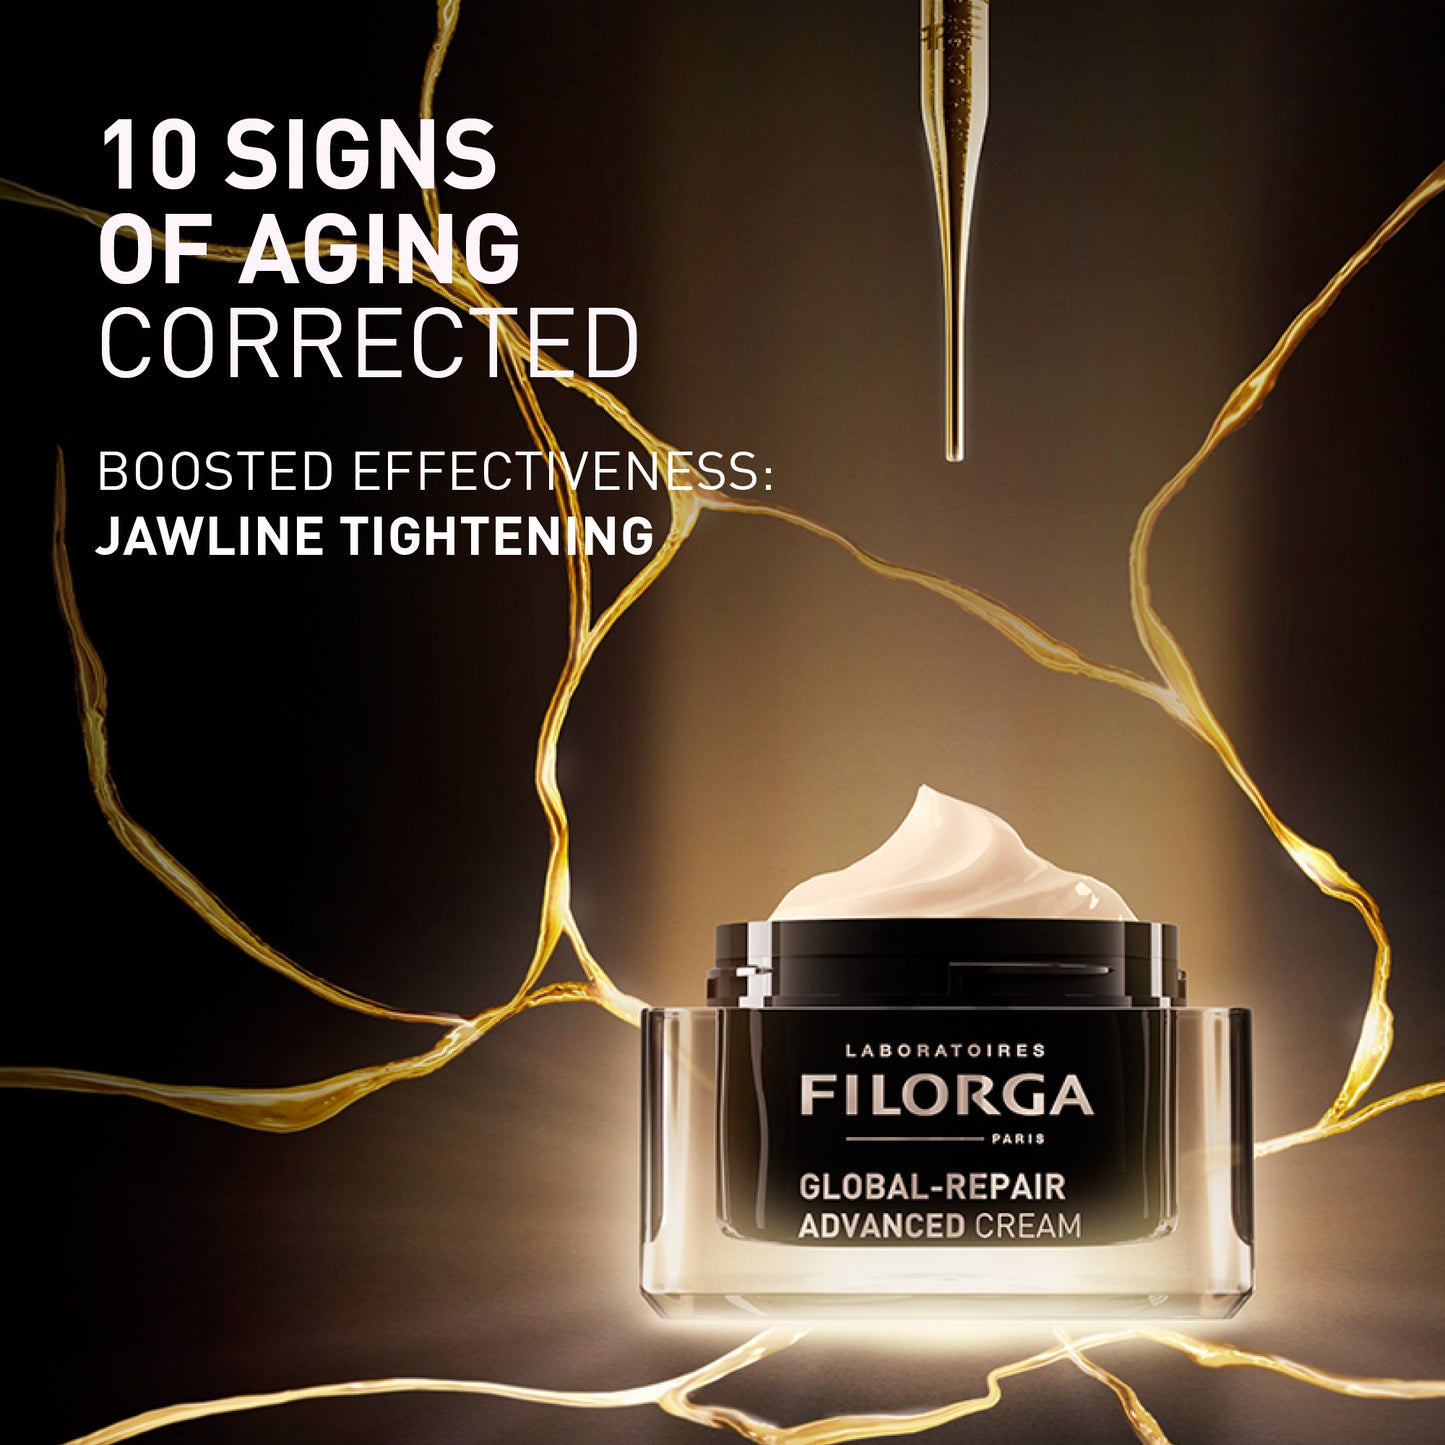 FILORGA GLOBAL-REPAIR ADVANCED CREAM 10 signs of aging corrected boosted effectiveness: jawline tightening